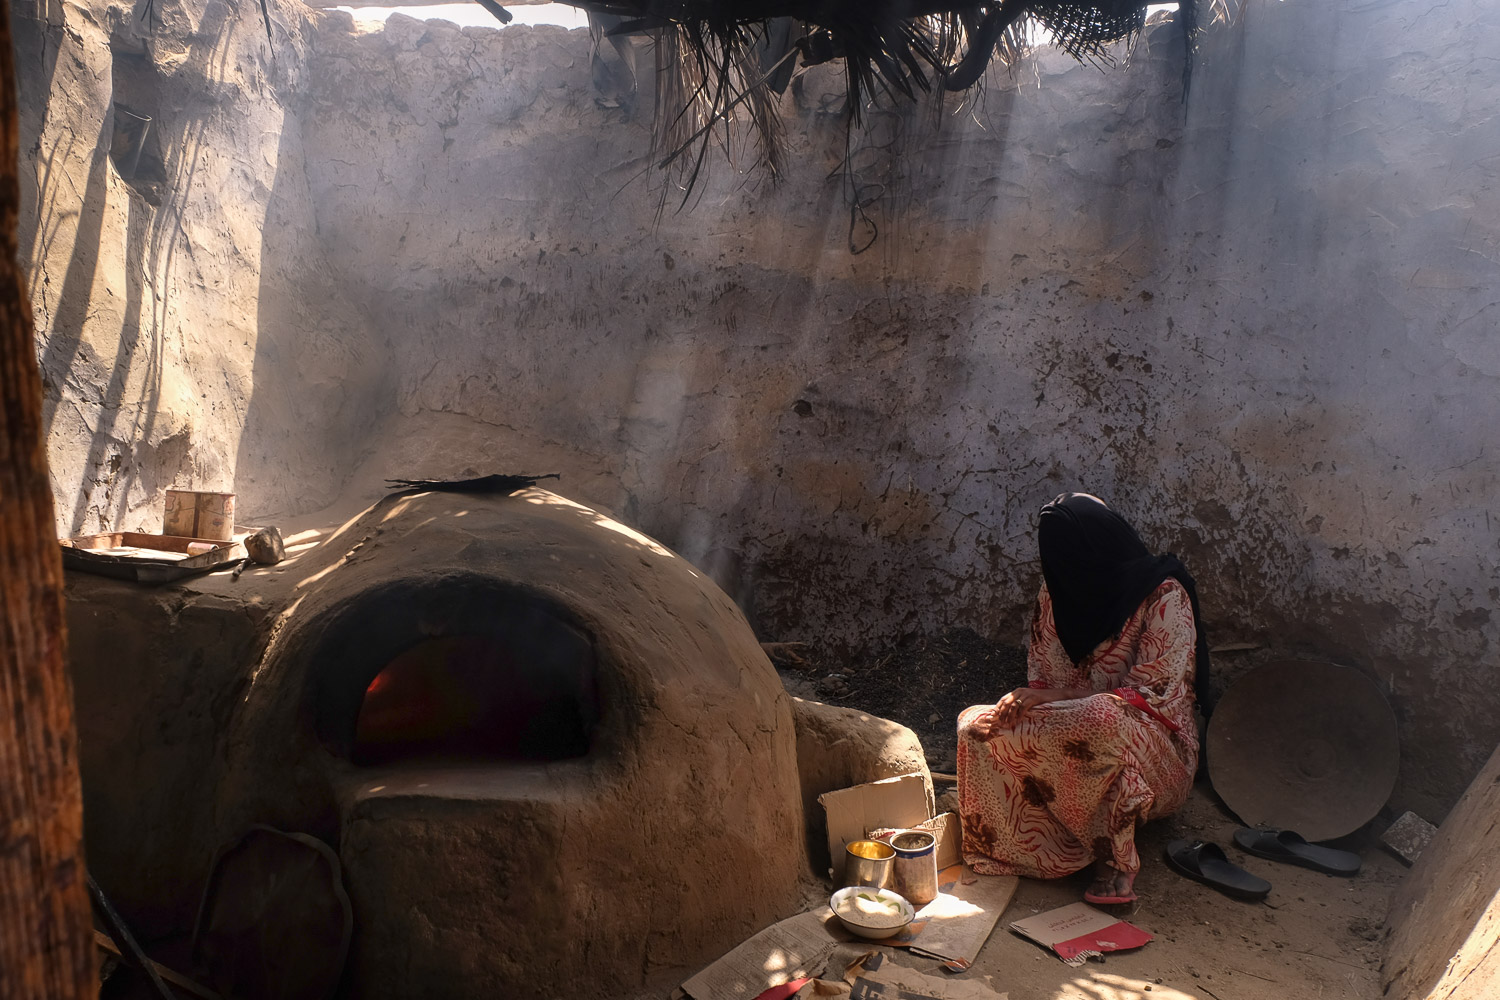 A woman on Suheil Island bakes loaves of bread in her communal outdoor kitchen (photo: Maya Hautefeuille)